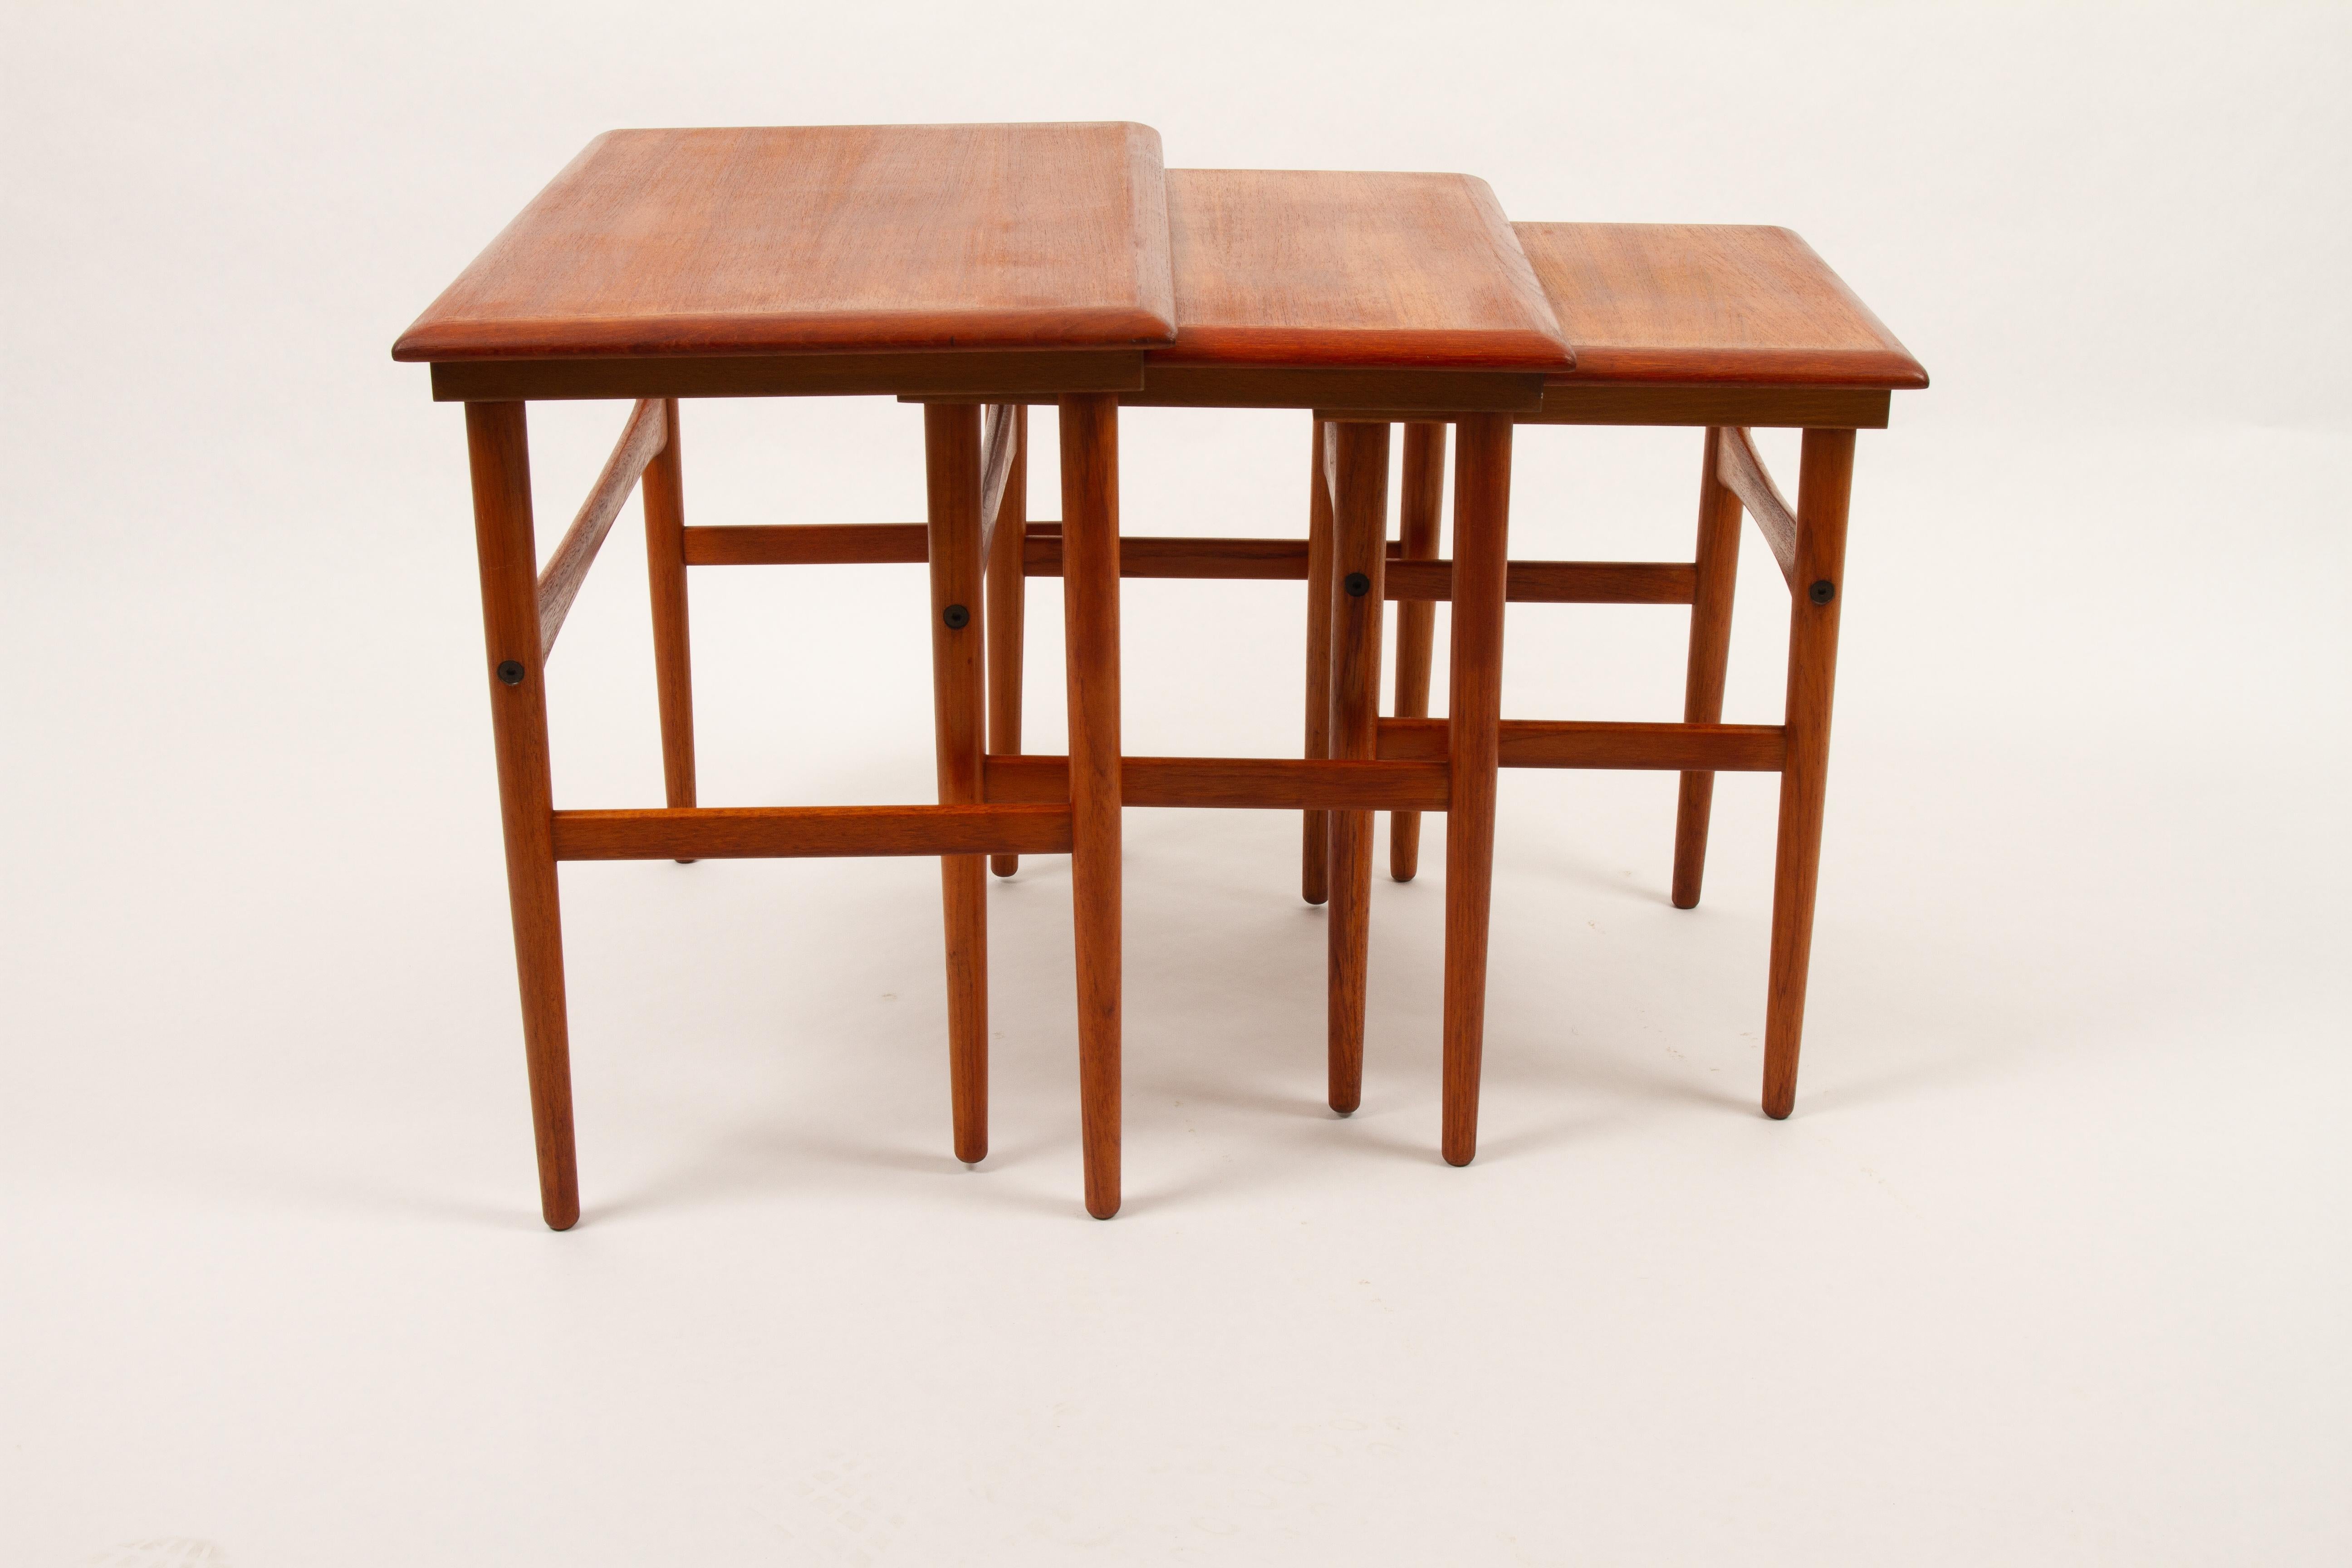 Set of elegant Danish nesting tables. Thin round tapered legs and shaped crossbars. Wide slanting edge in solid teak. Very versatile, can be used together or as individual tables for lamps, plants or decorative items. A Mid-Century Modern must have.